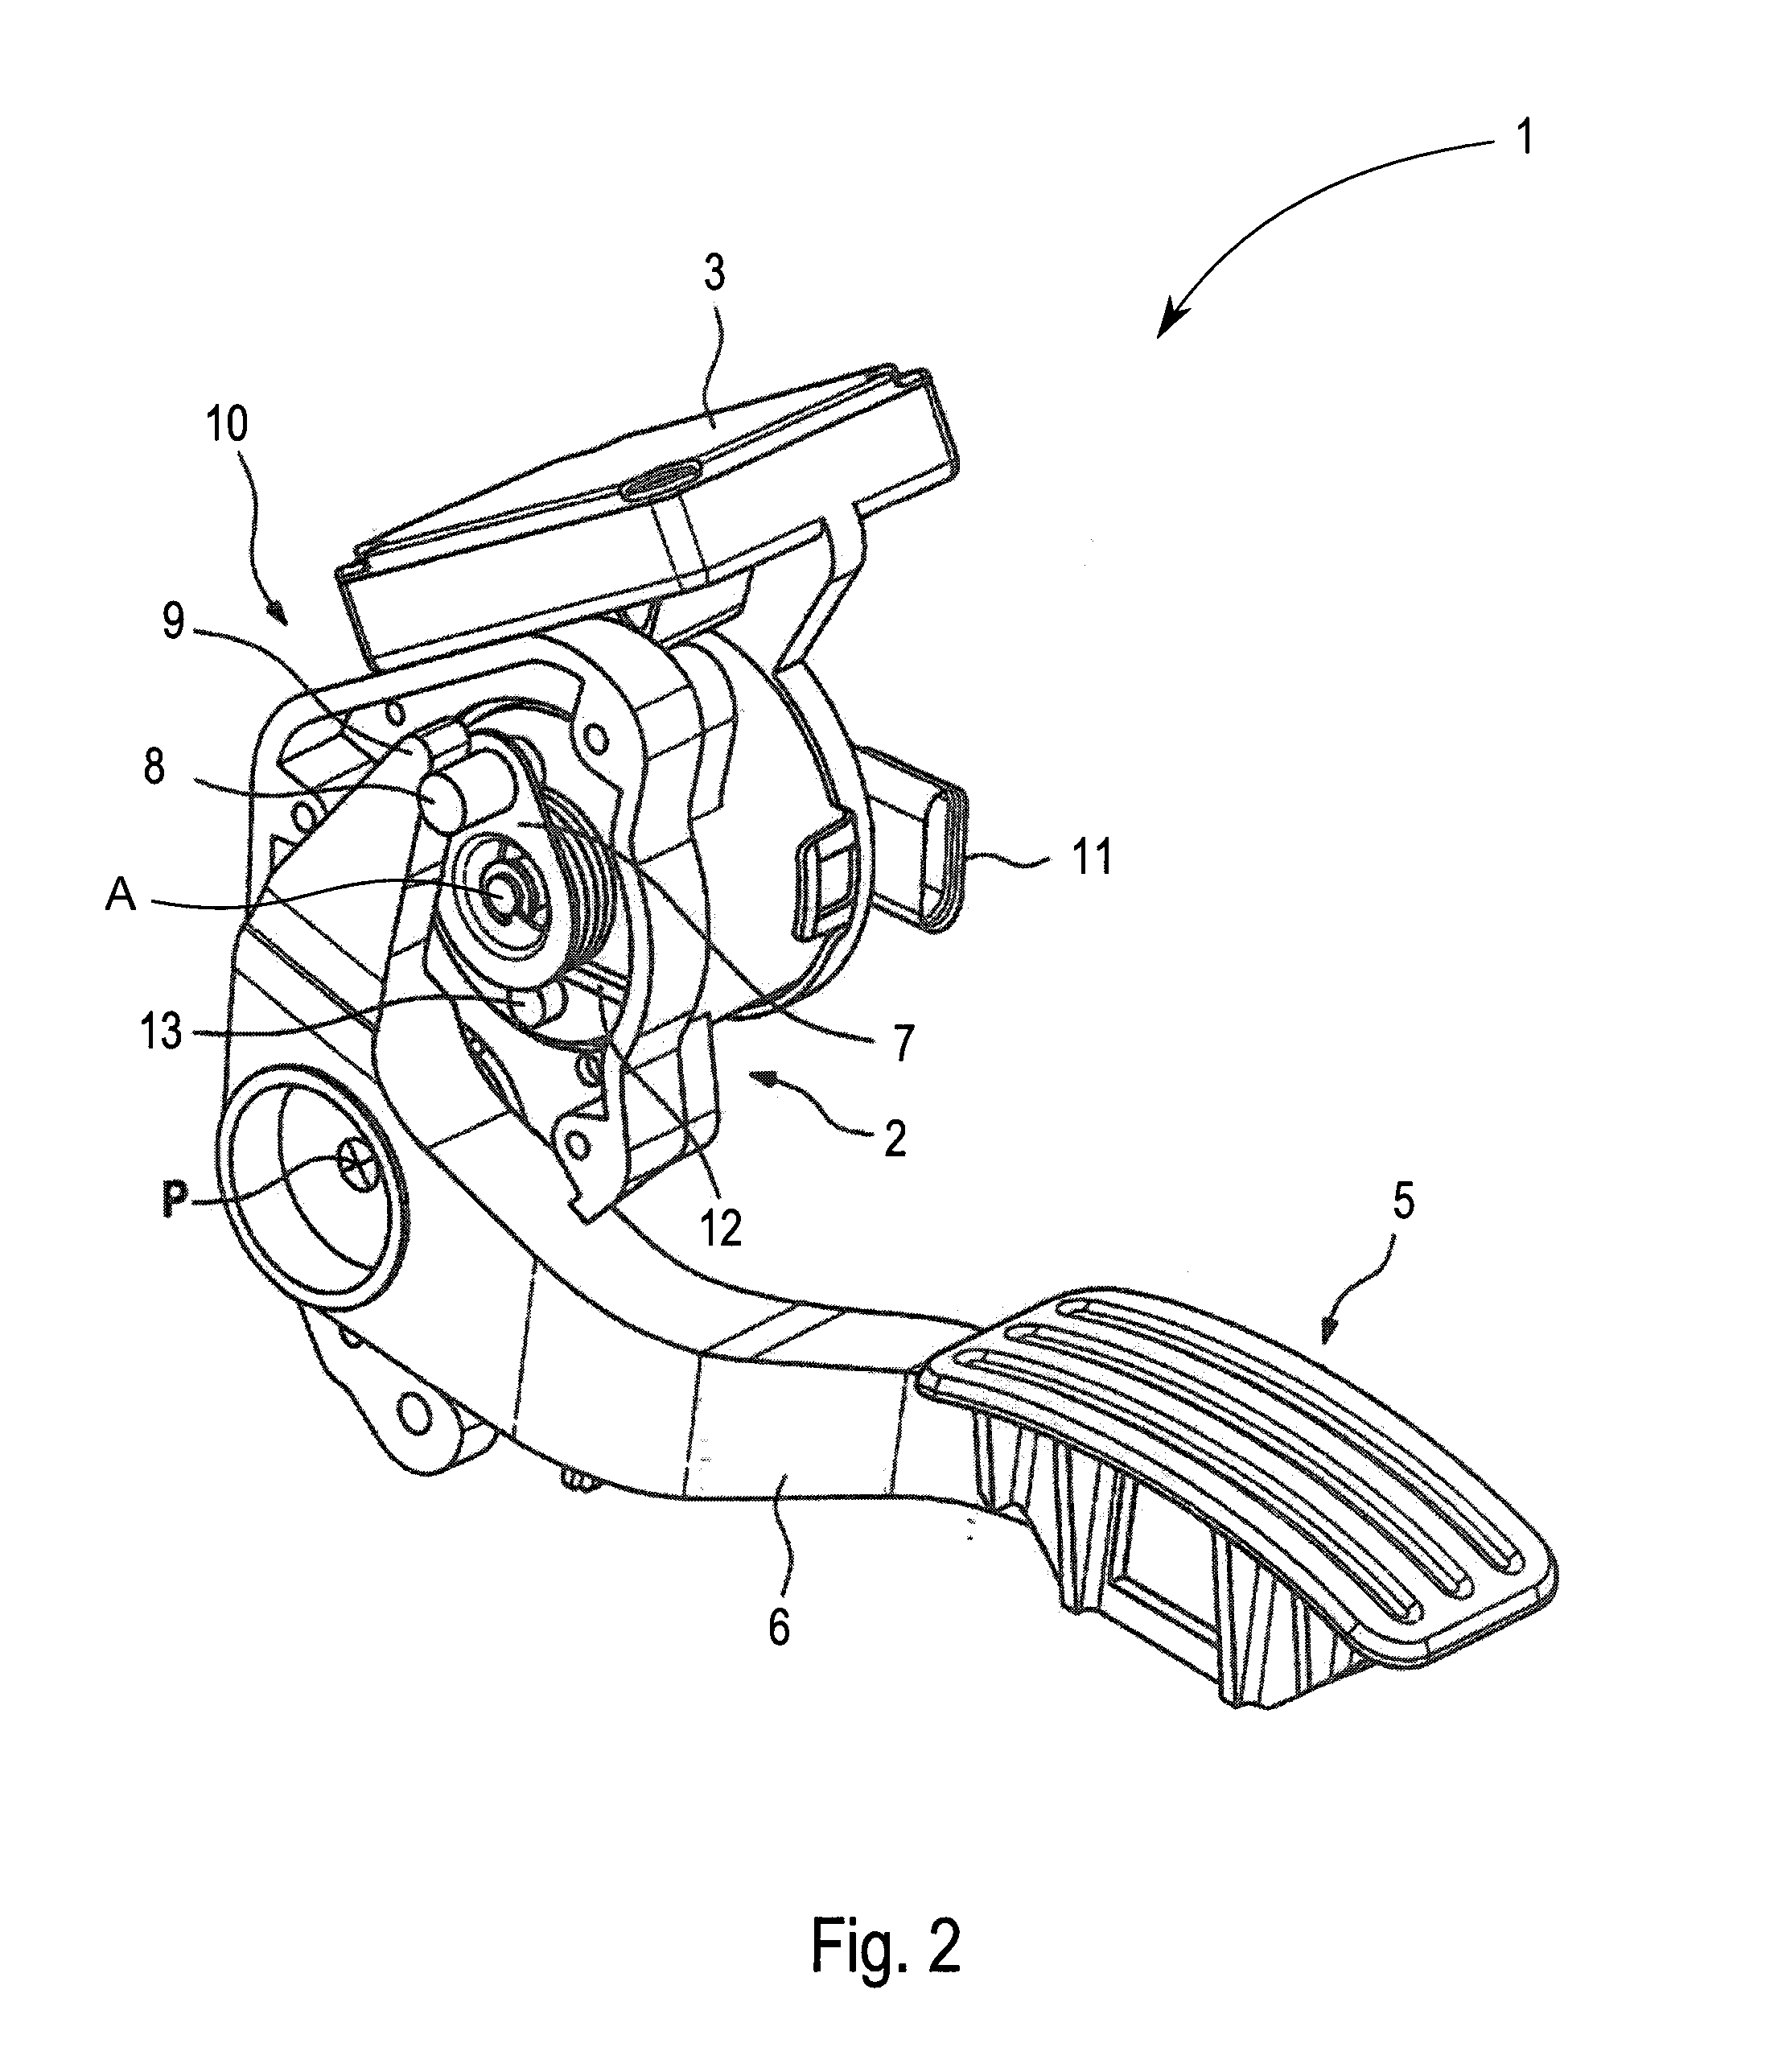 Accelerator Force Feedback Pedal (AFFP) as Assistance System for Distance Control in Traffic